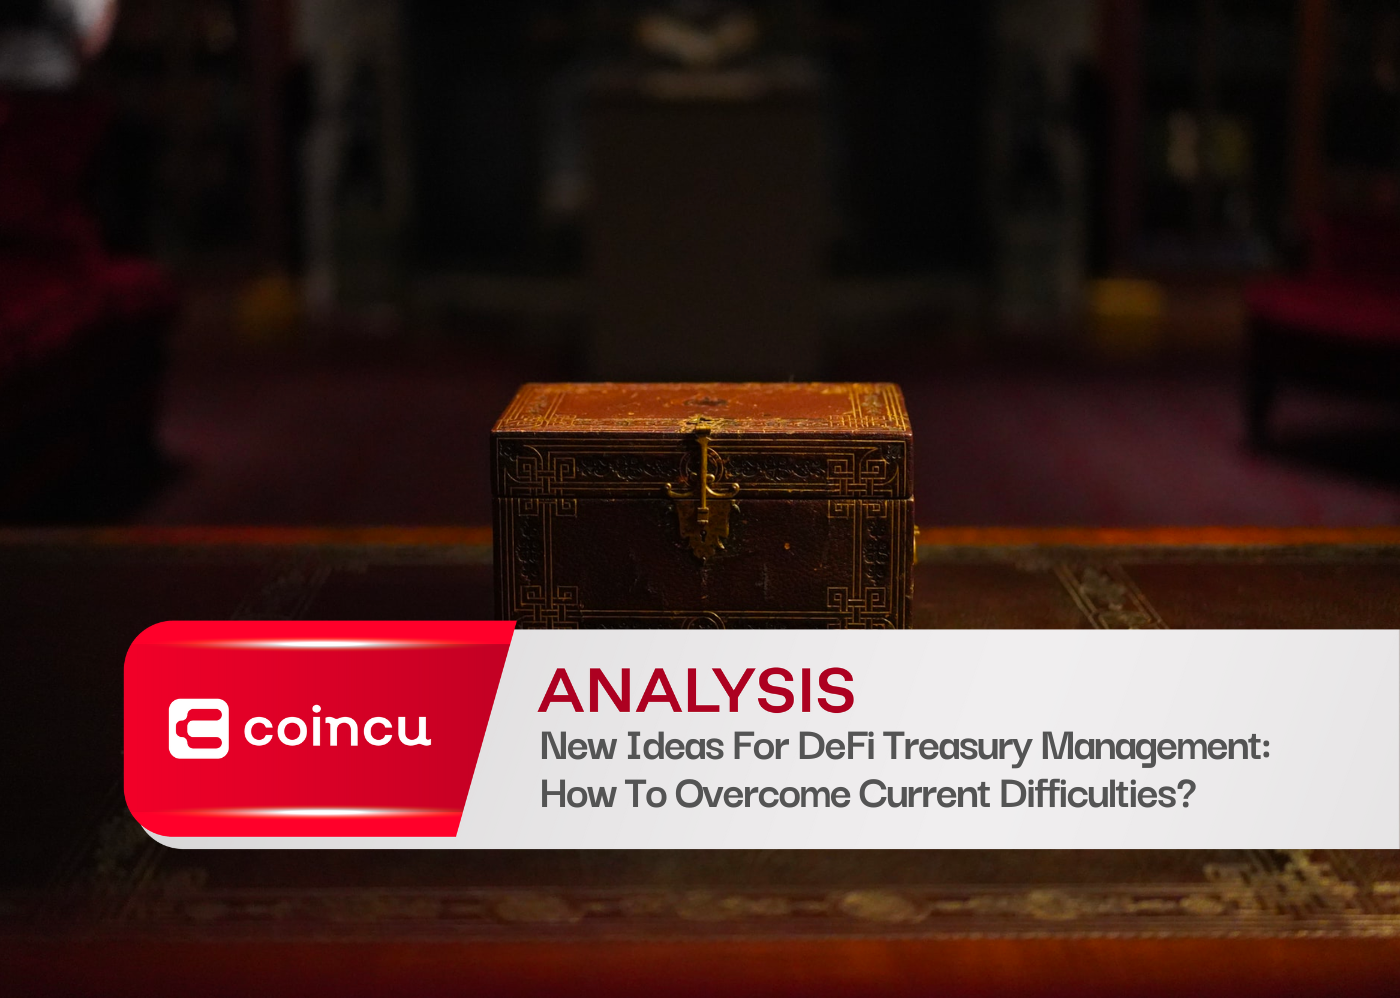 New Ideas For DeFi Treasury Management: How To Overcome Current Difficulties?